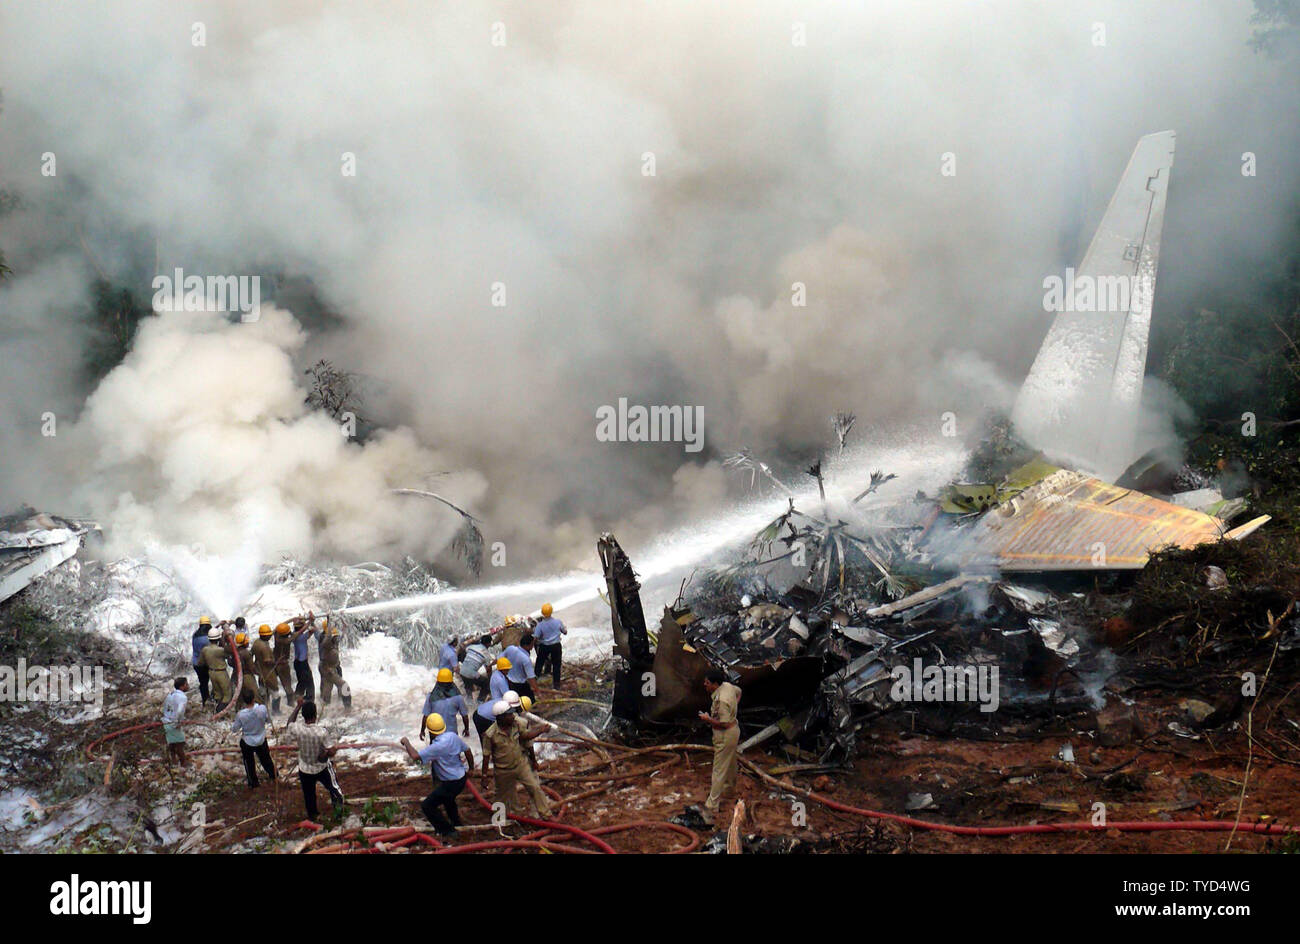 Firefighters douse the Air India Express plane after it overshot the runway and crashed at Bajpe Airport in Mangalore, India on May 22, 2010. Of the 166 passengers and crew on board the plane, only 8 survived. UPI Stock Photo